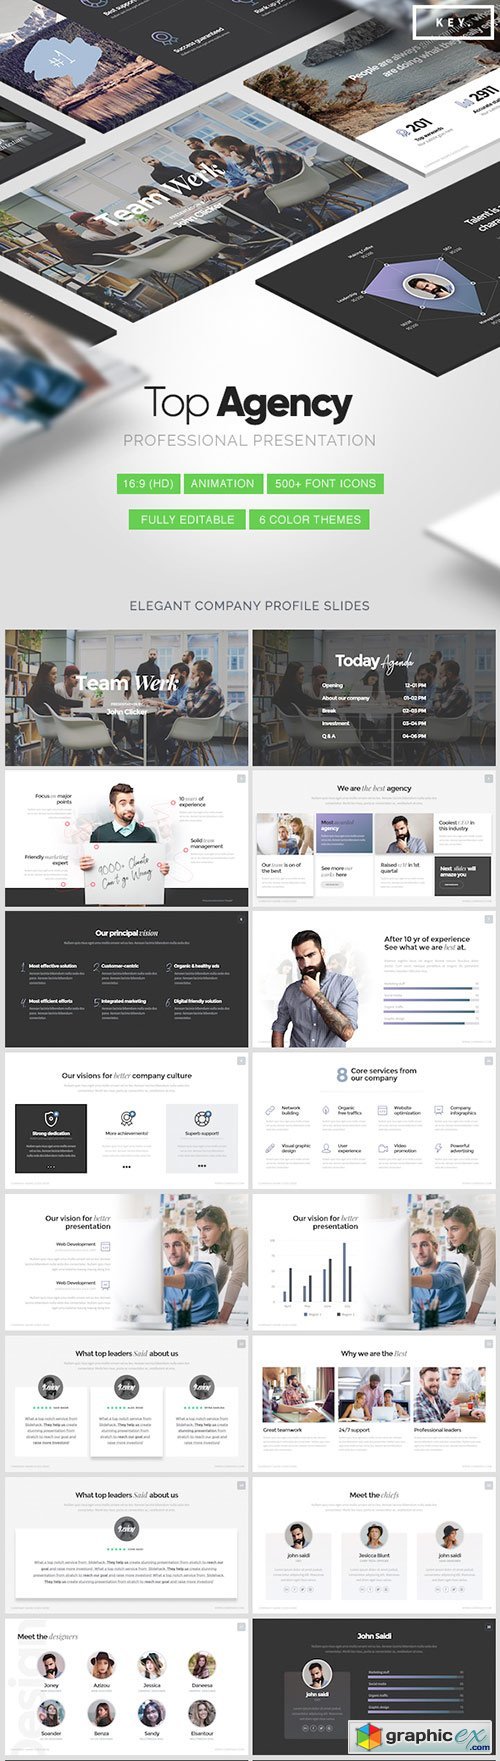 Top Agency - Powerpoint Template for Agencies